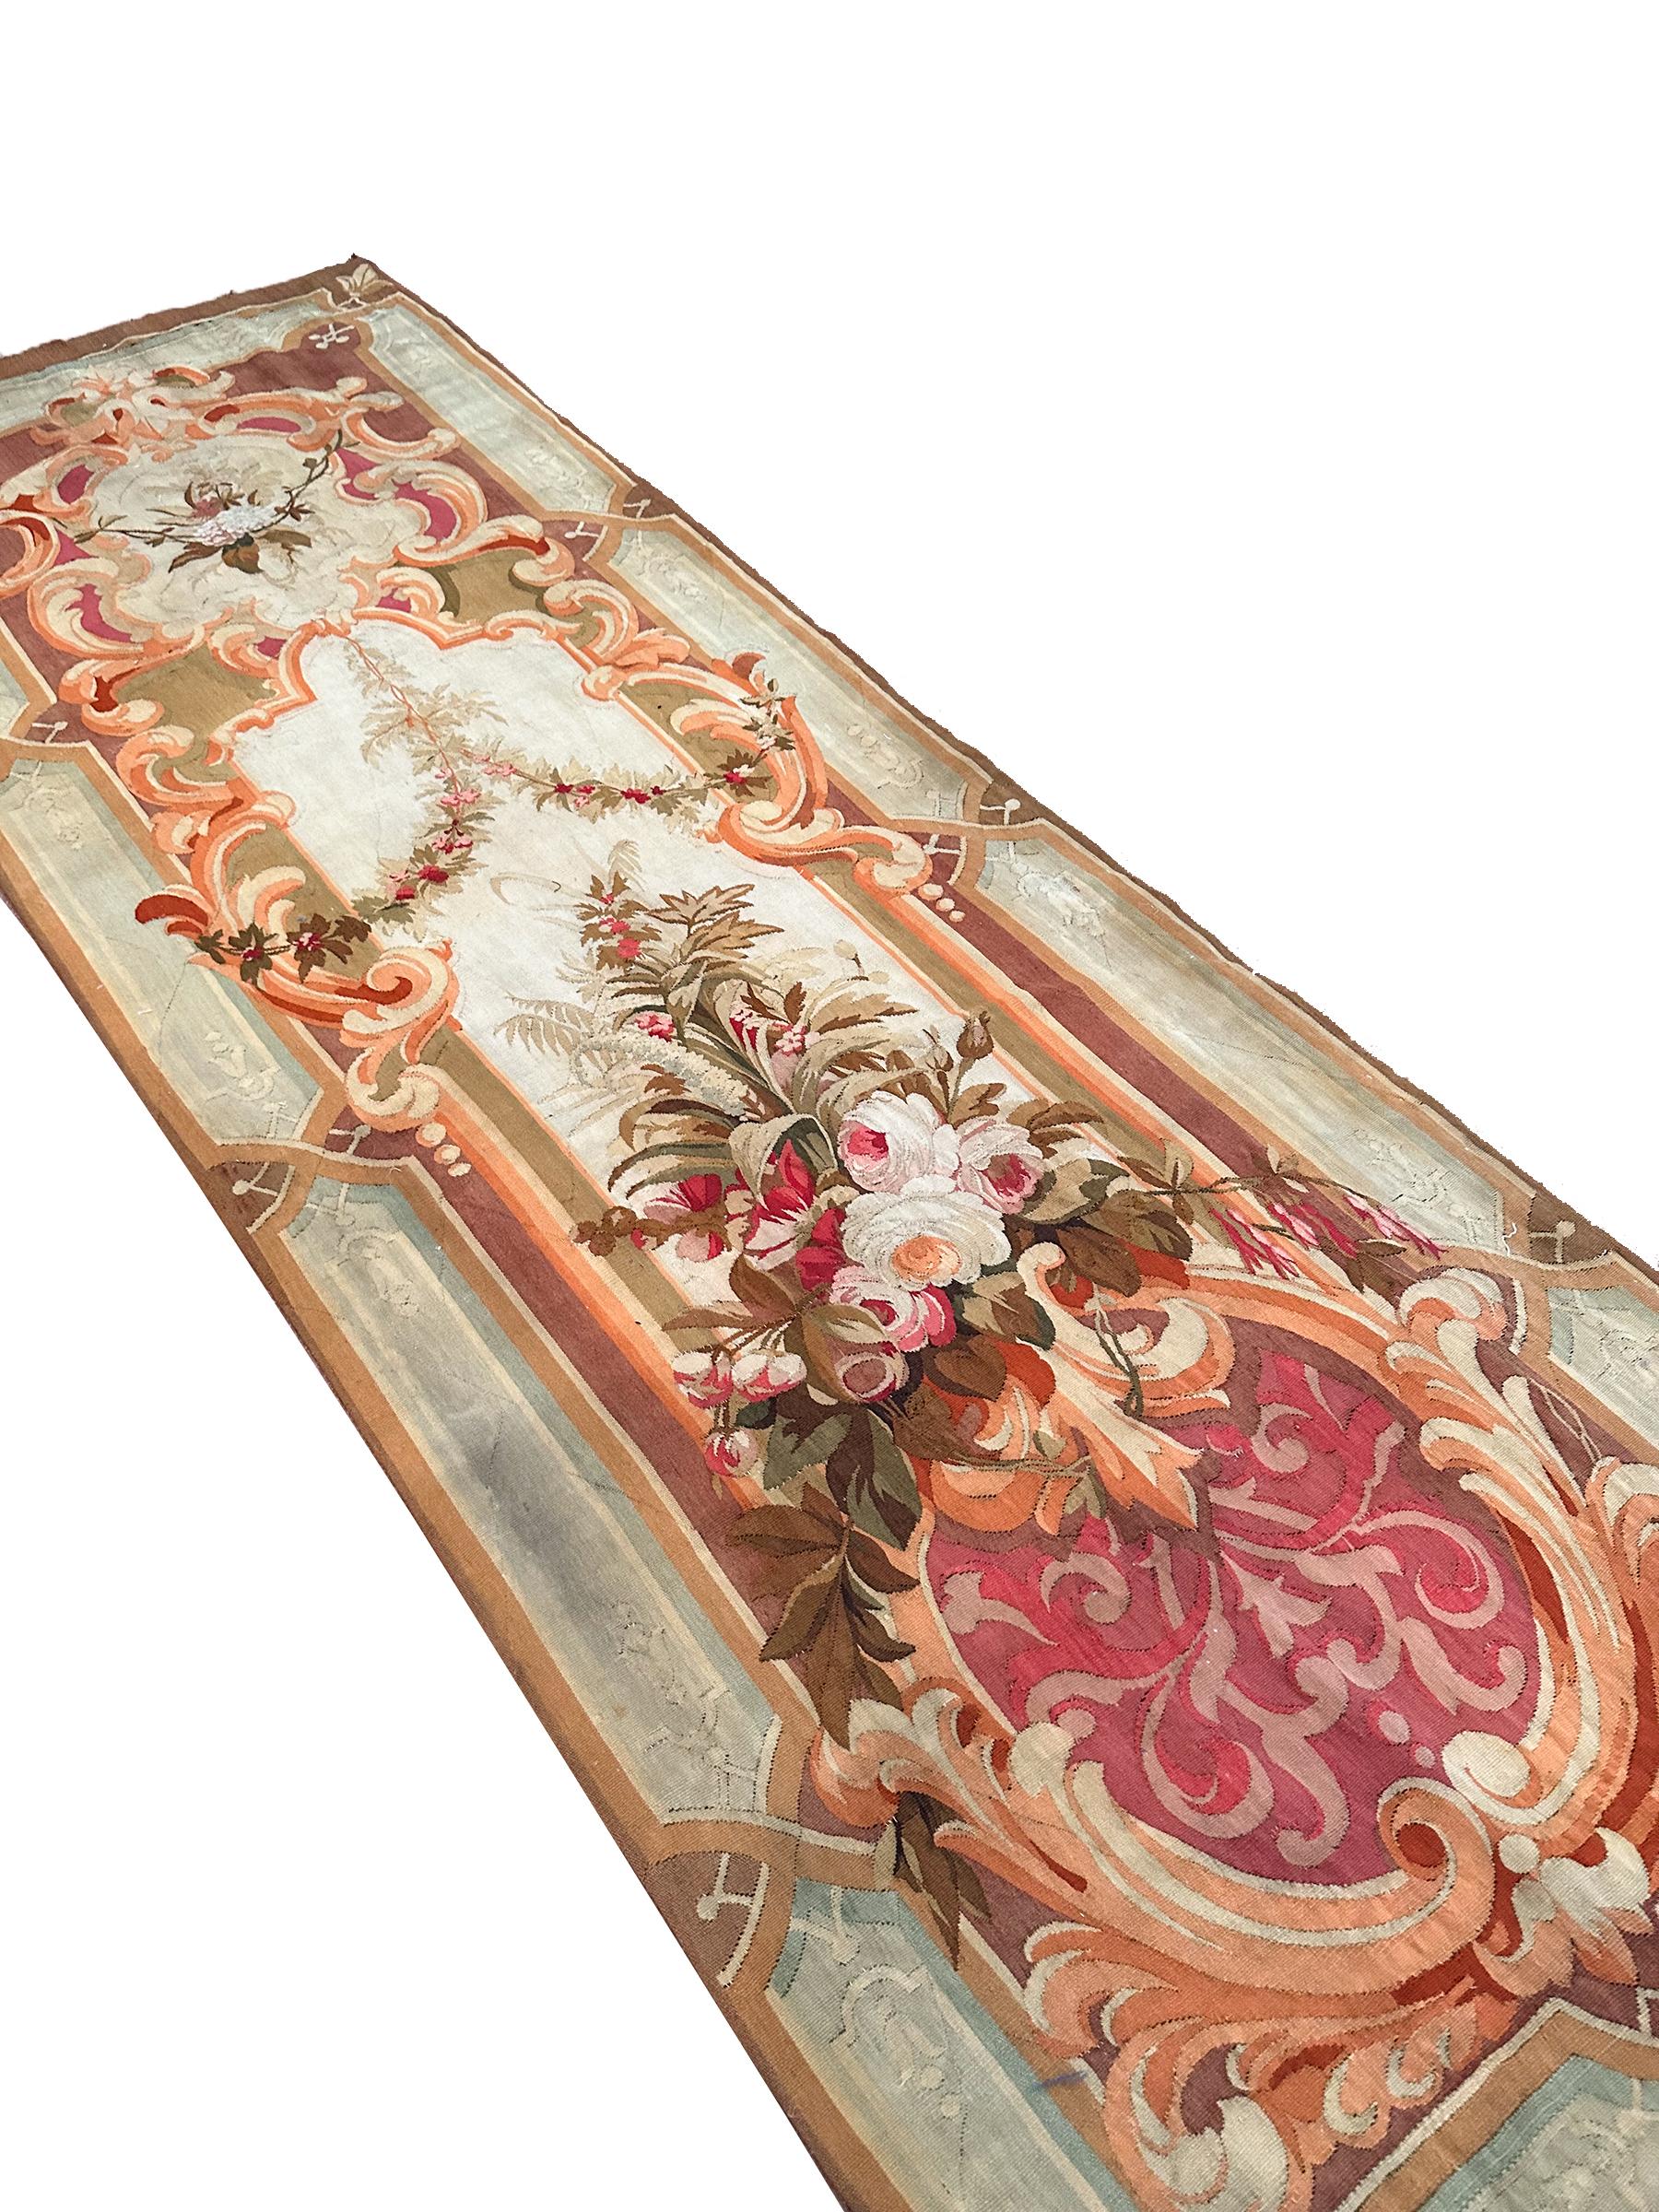 1920 Antique French Aubusson Tapestry Rug Floral Vase Runner 3x10 1880 97x287cm For Sale 2